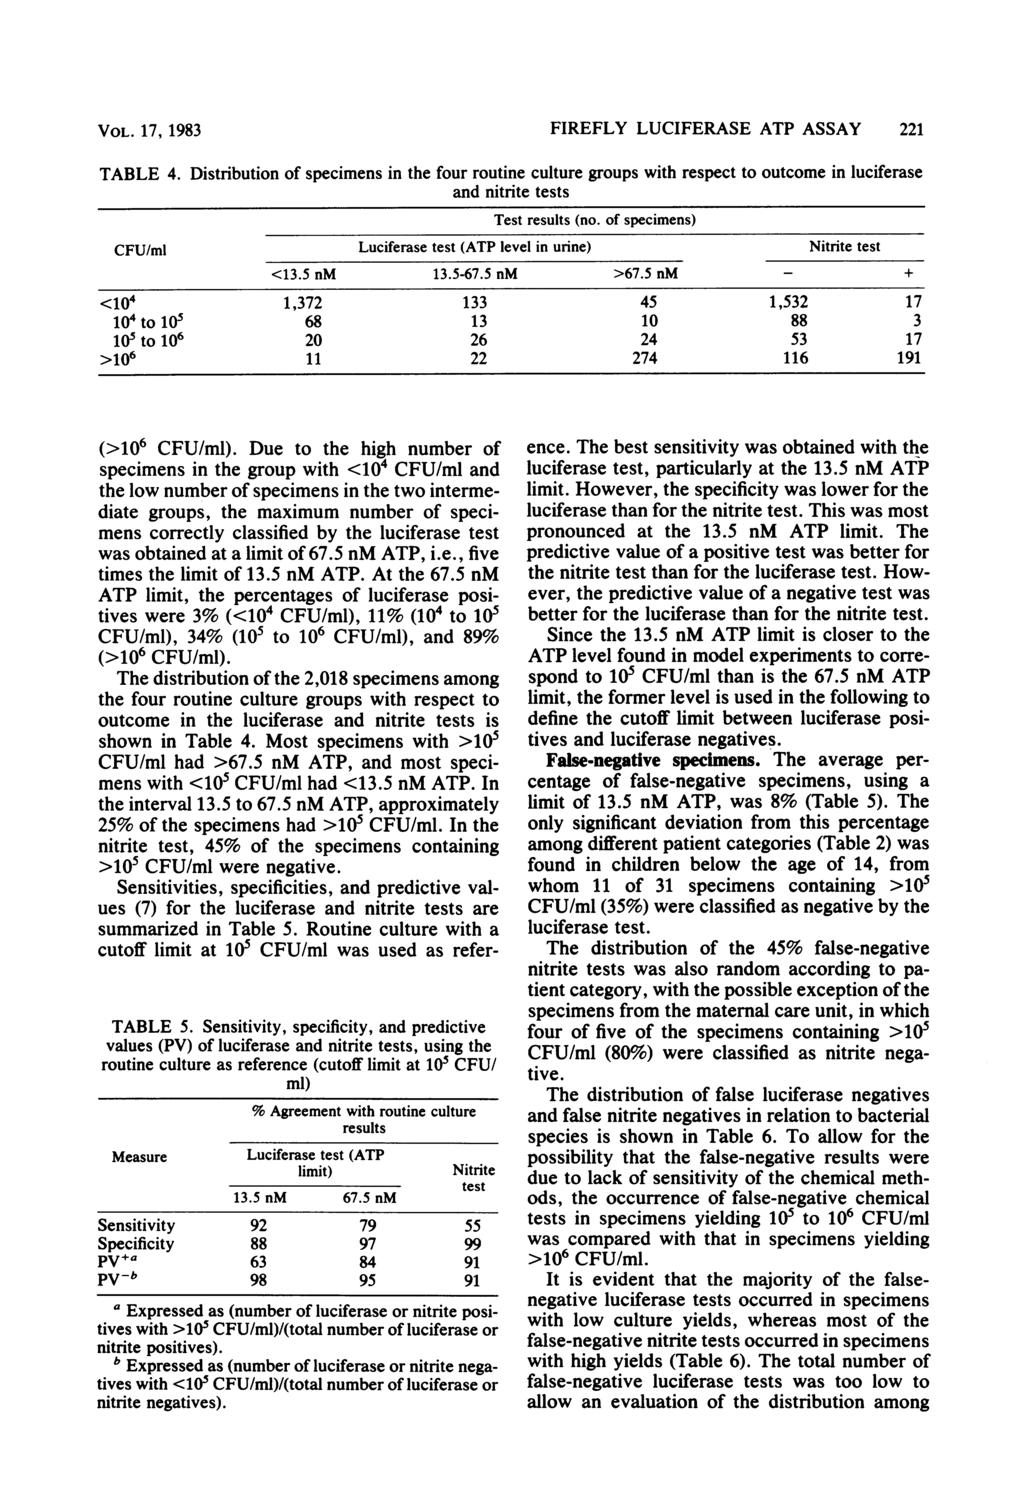 VOL. 17, 1983 FIREFLY LUCIFERASE ATP ASSAY 221 TABLE 4. Distribution of specimens in the four routine culture groups with respect to outcome in luciferase and nitrite tests Test results (no.